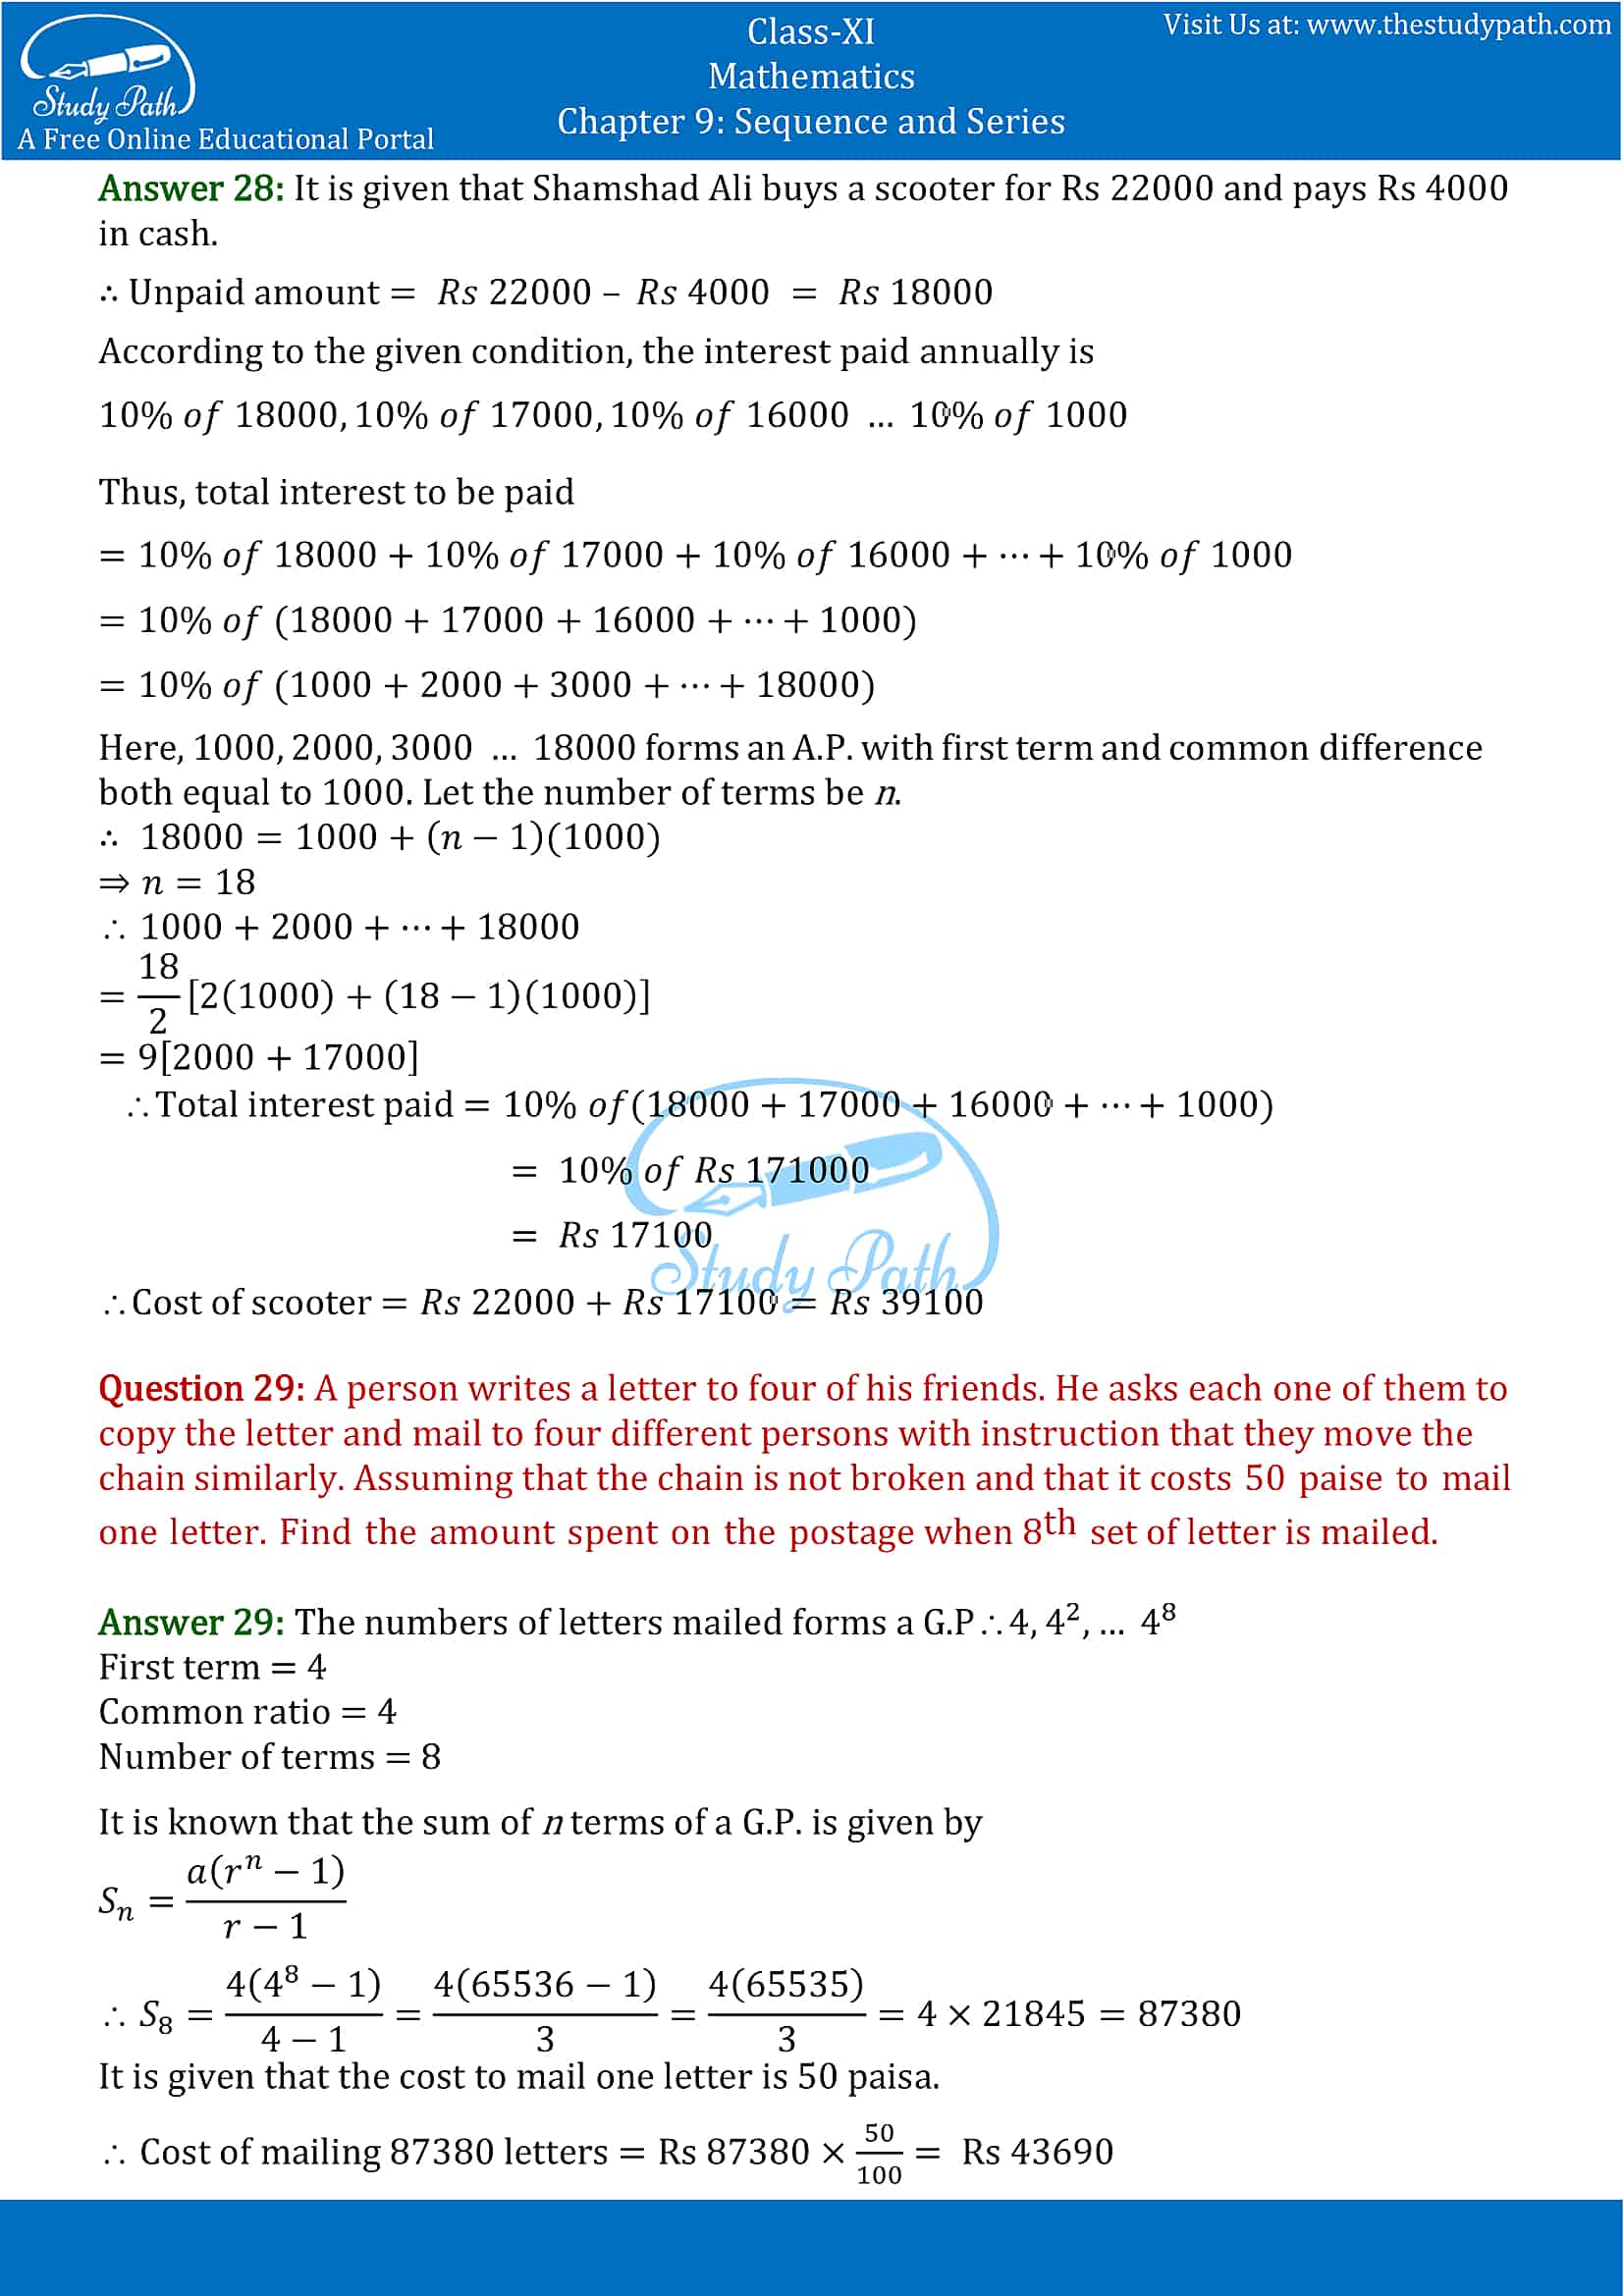 NCERT Solutions for Class 11 Maths chapter 9 Sequence and Series Miscellaneous Exercise Part-20